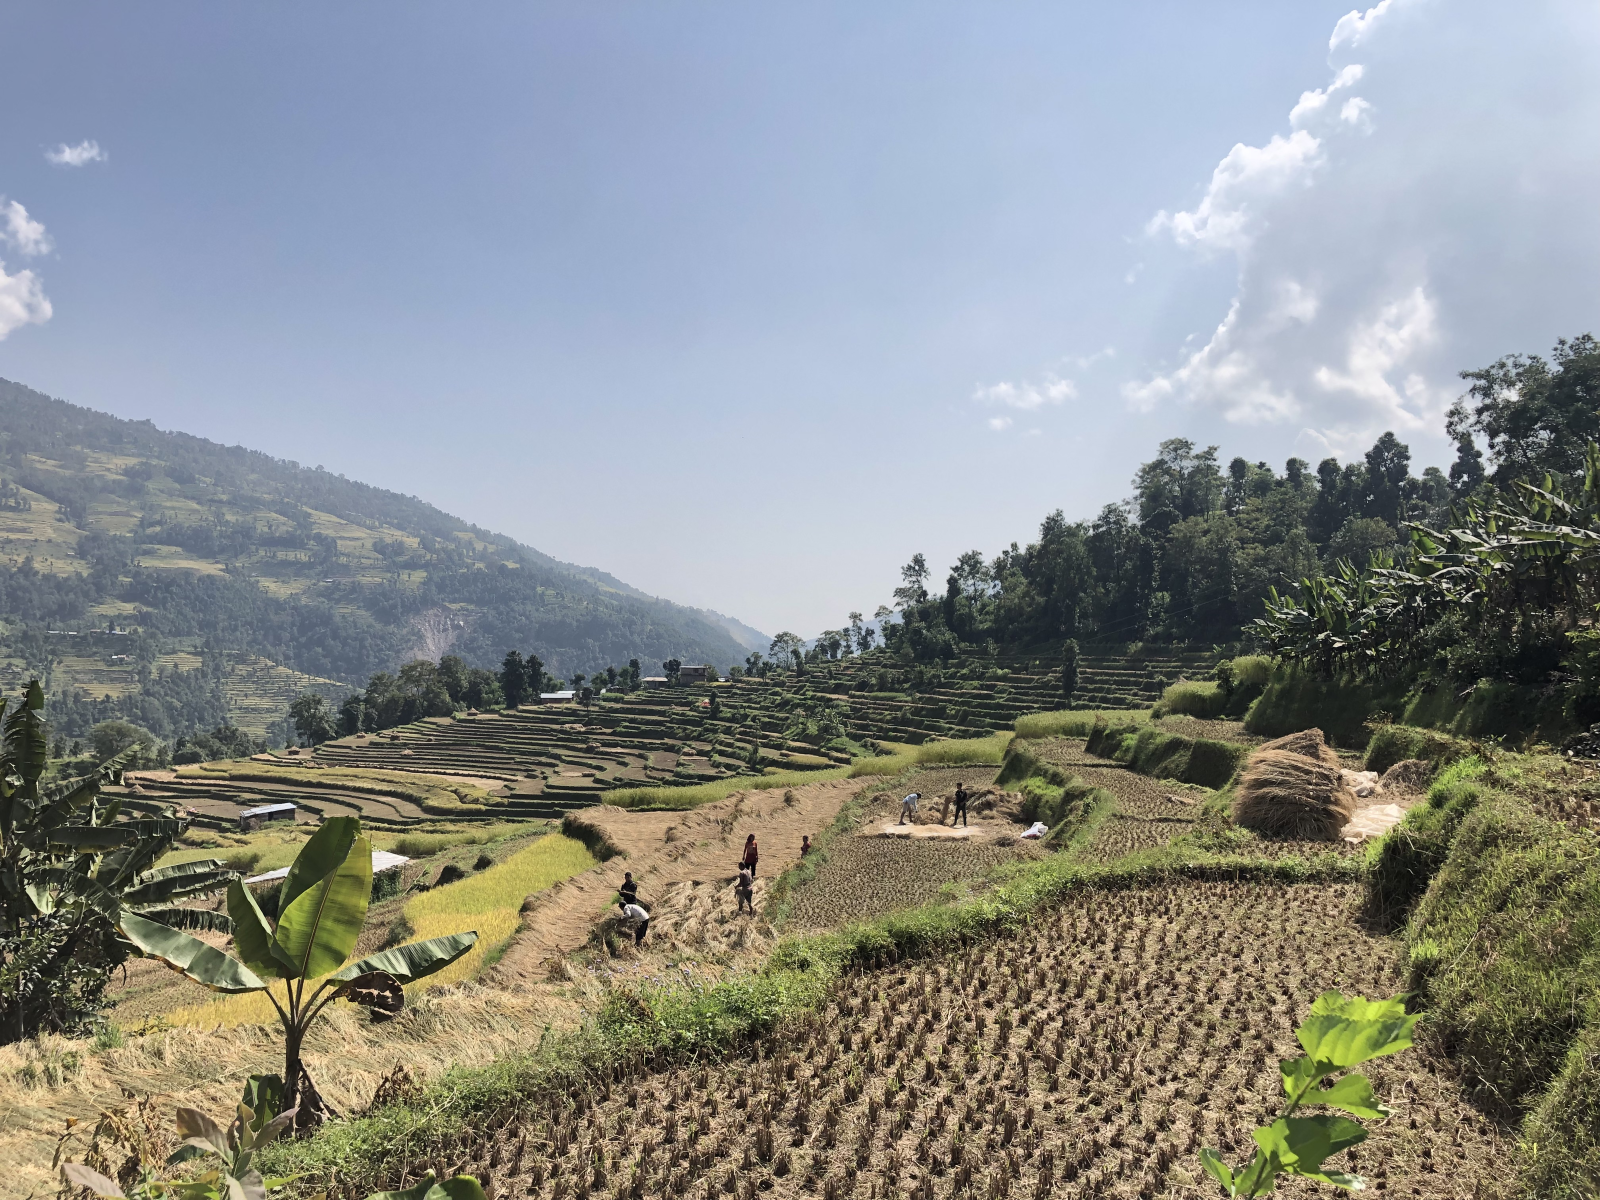 Previously fallow land has been converted into productive farmland in Sindupalchok, Nepal